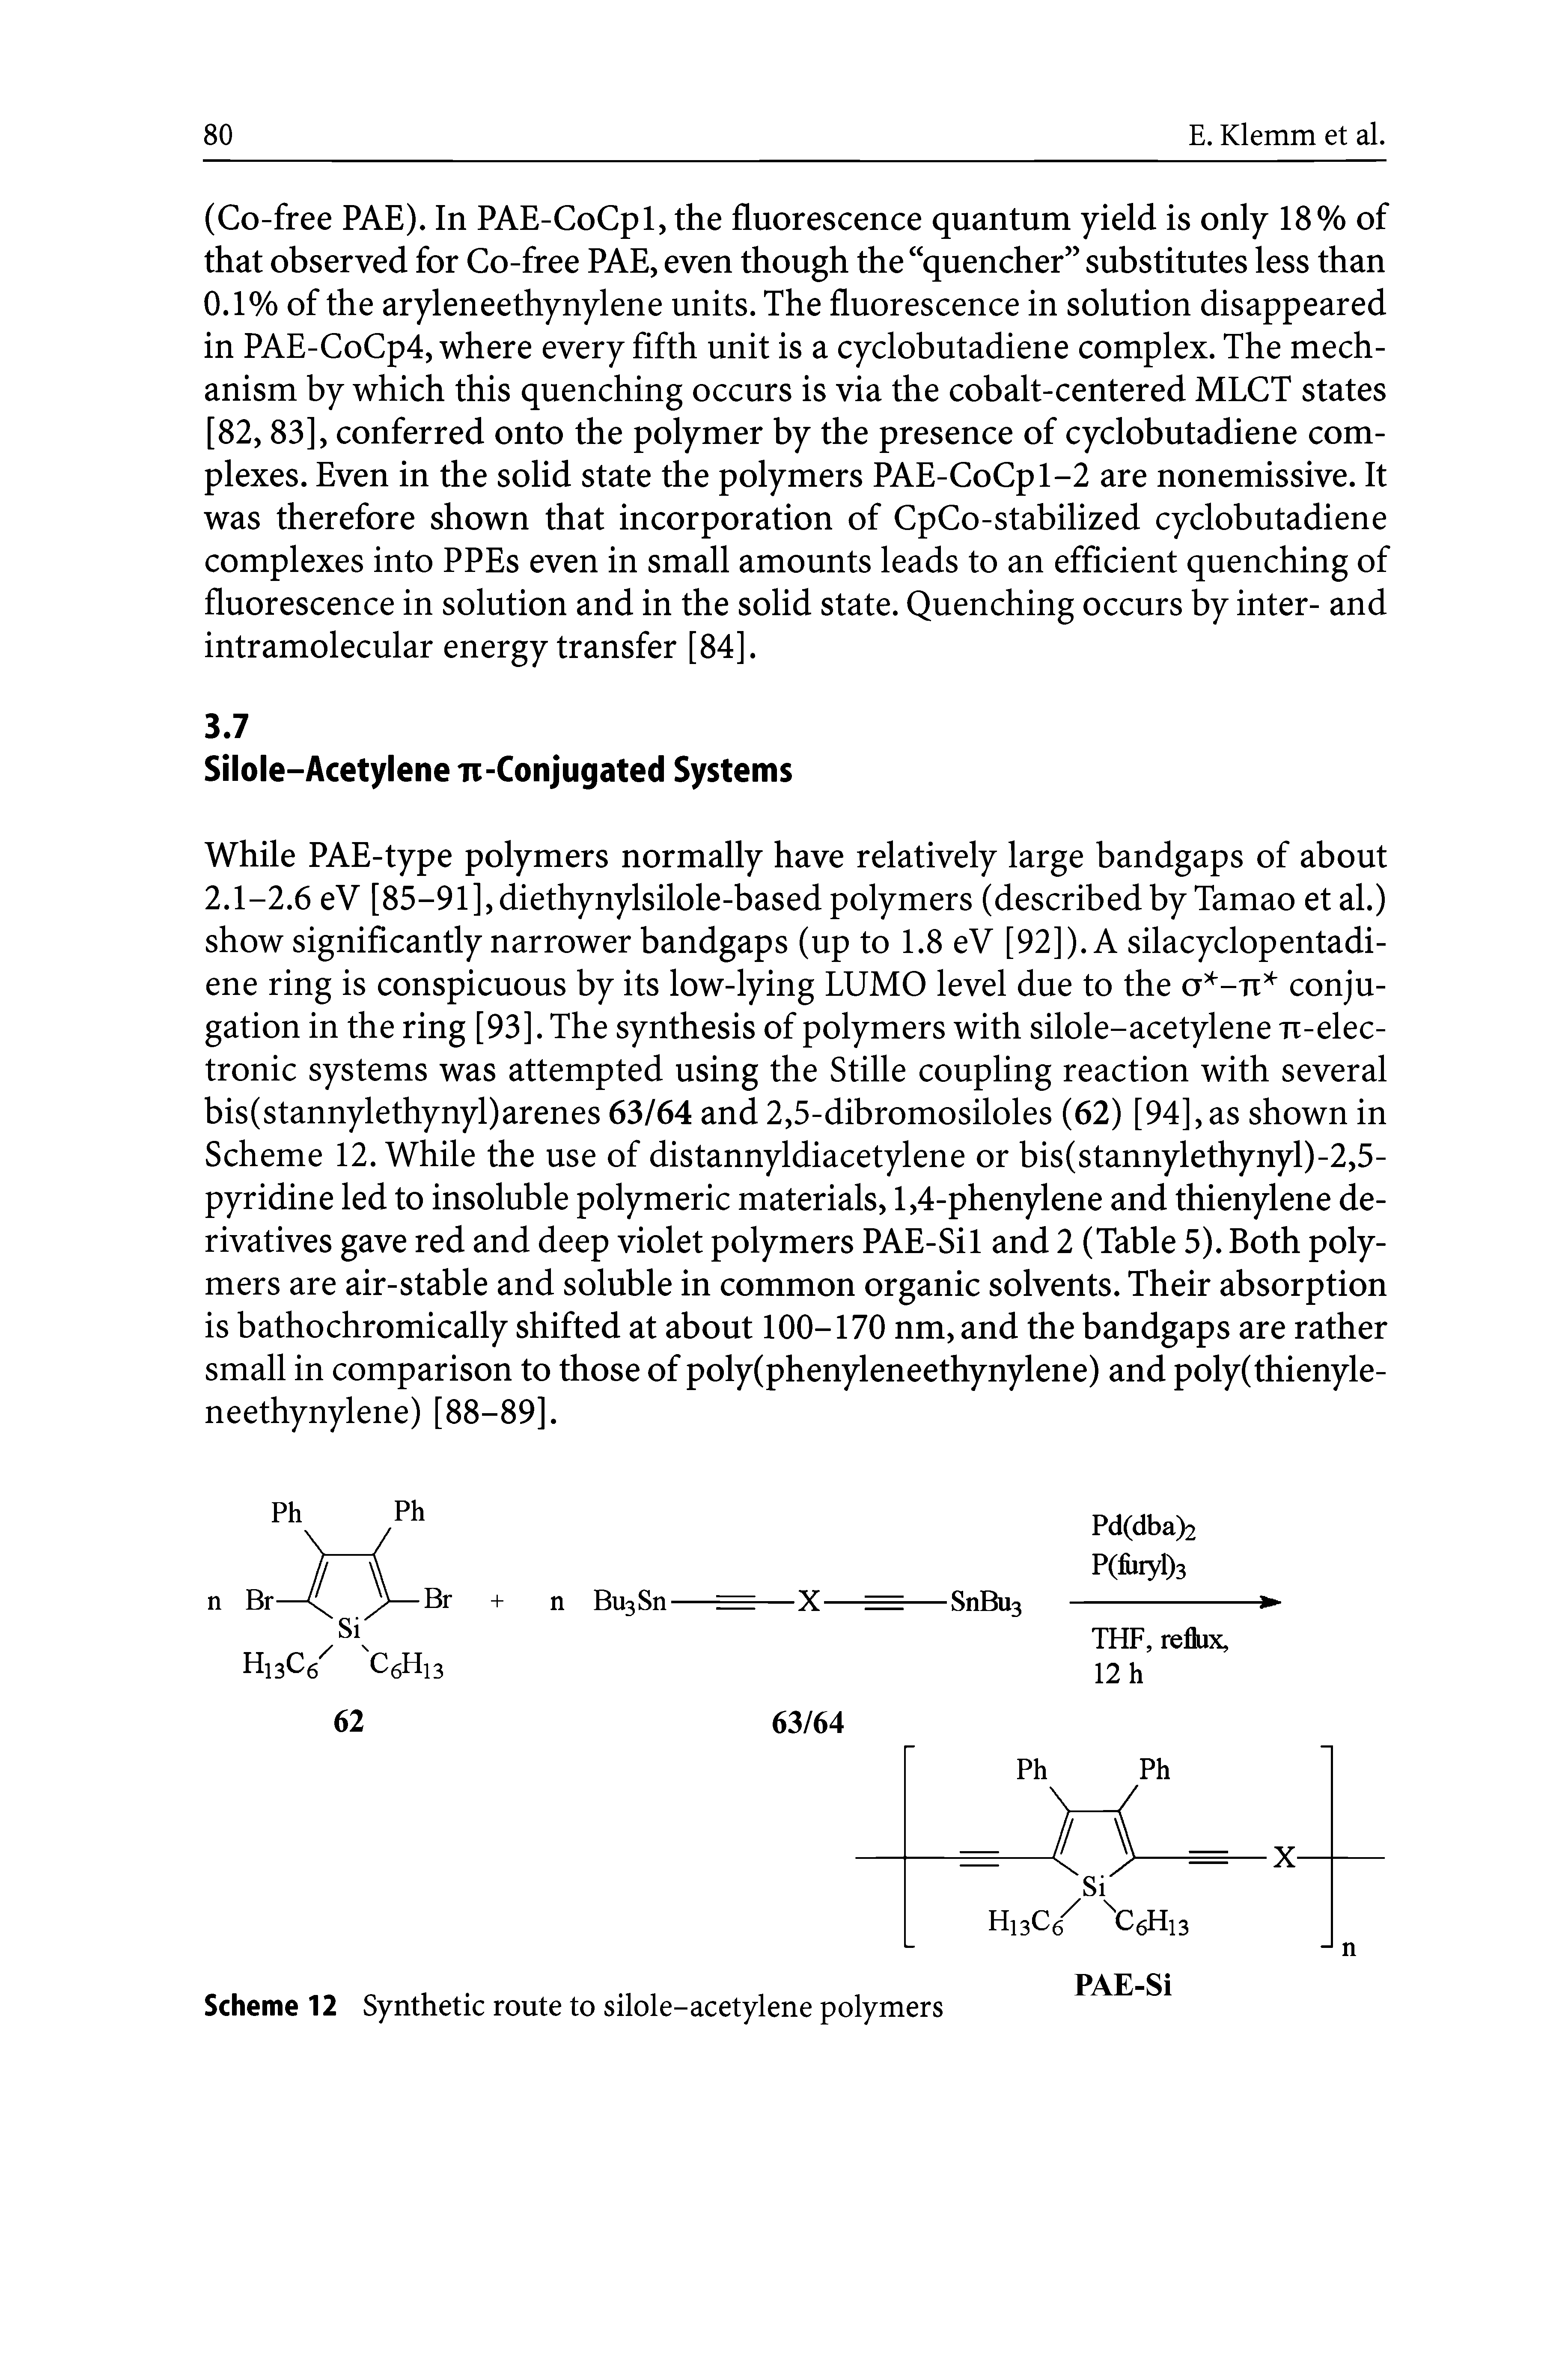 Scheme 12 Synthetic route to silole-acetylene polymers...